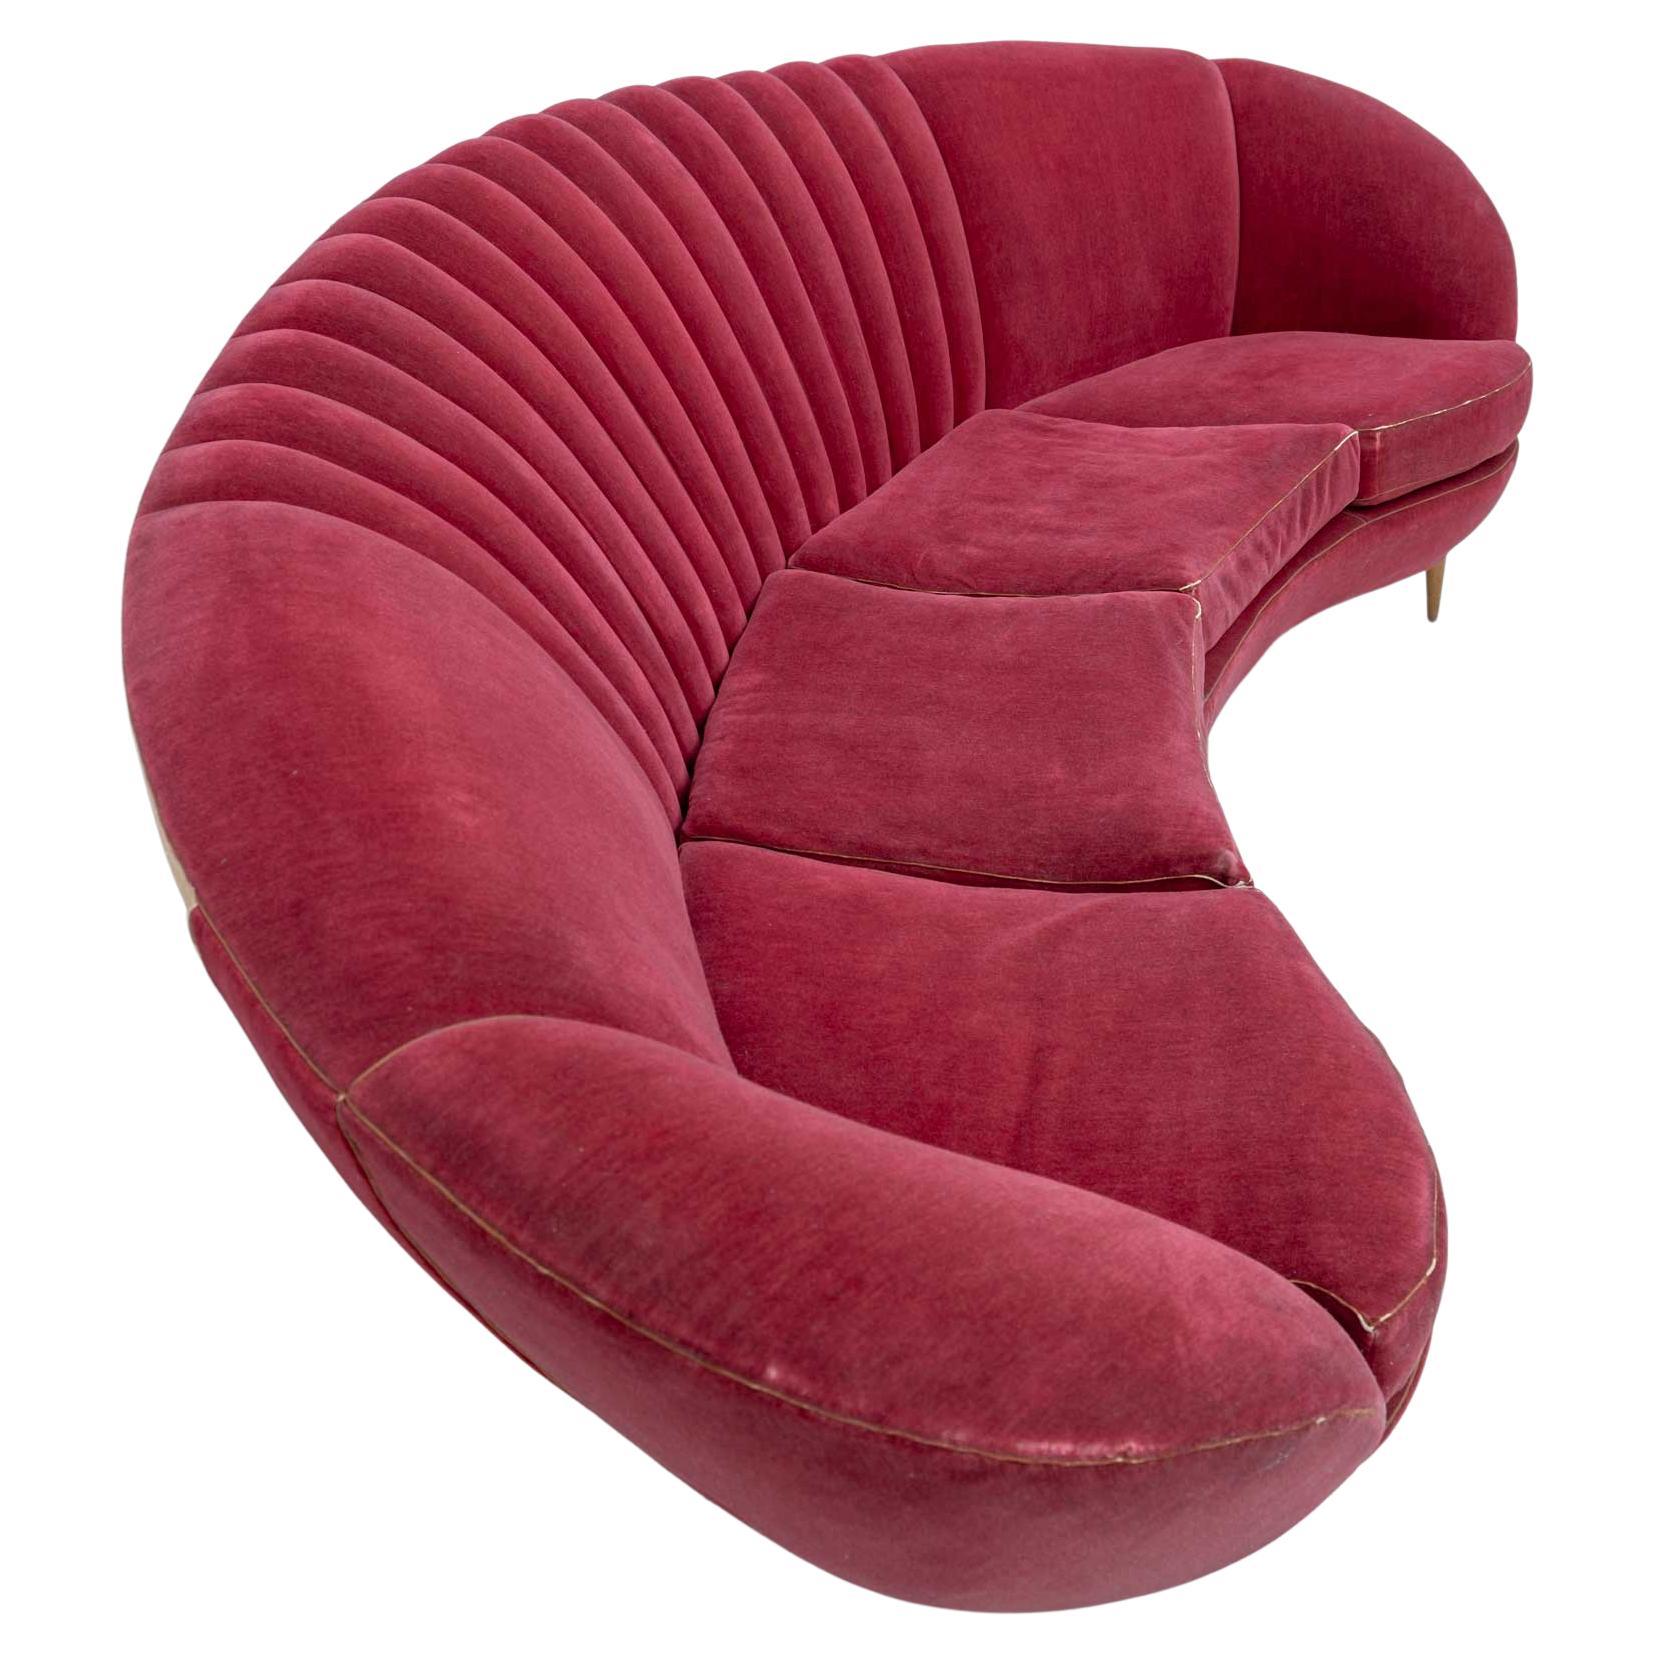 Daisy model sofa with wide and comfortable backrest, conical beech foot, good condition of the padding, cushions with springs.
The velvet is original from the time but a new upholstery is recommended.
Designed by Gio Ponti and produced by